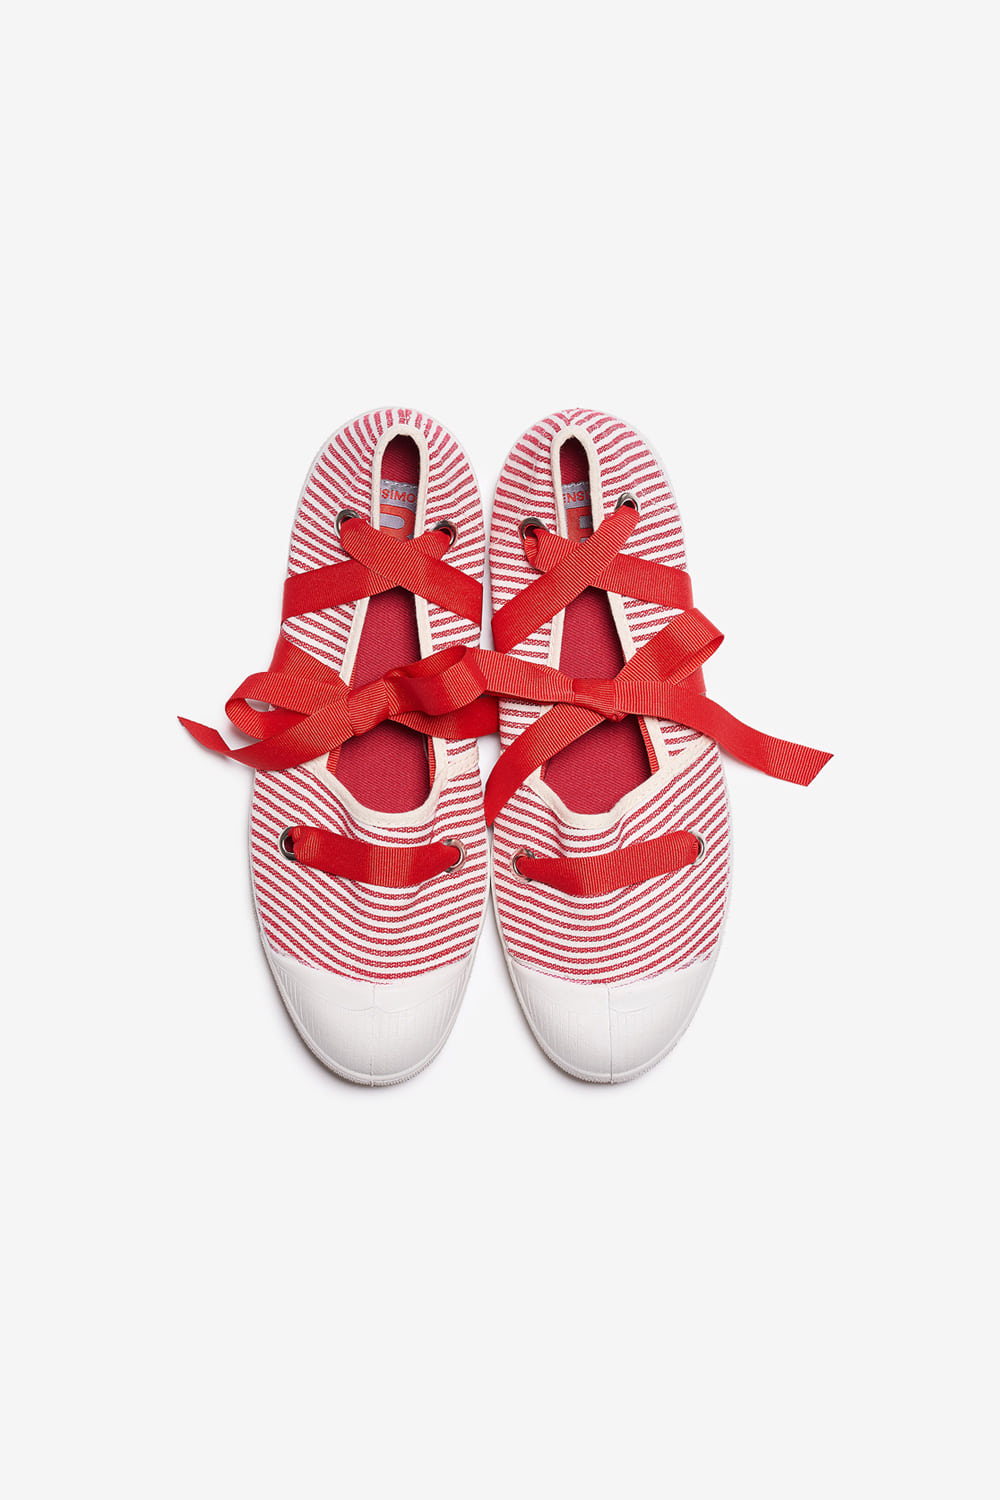 LIMITED ESPADRILLE LIMITED STRIPE - RED